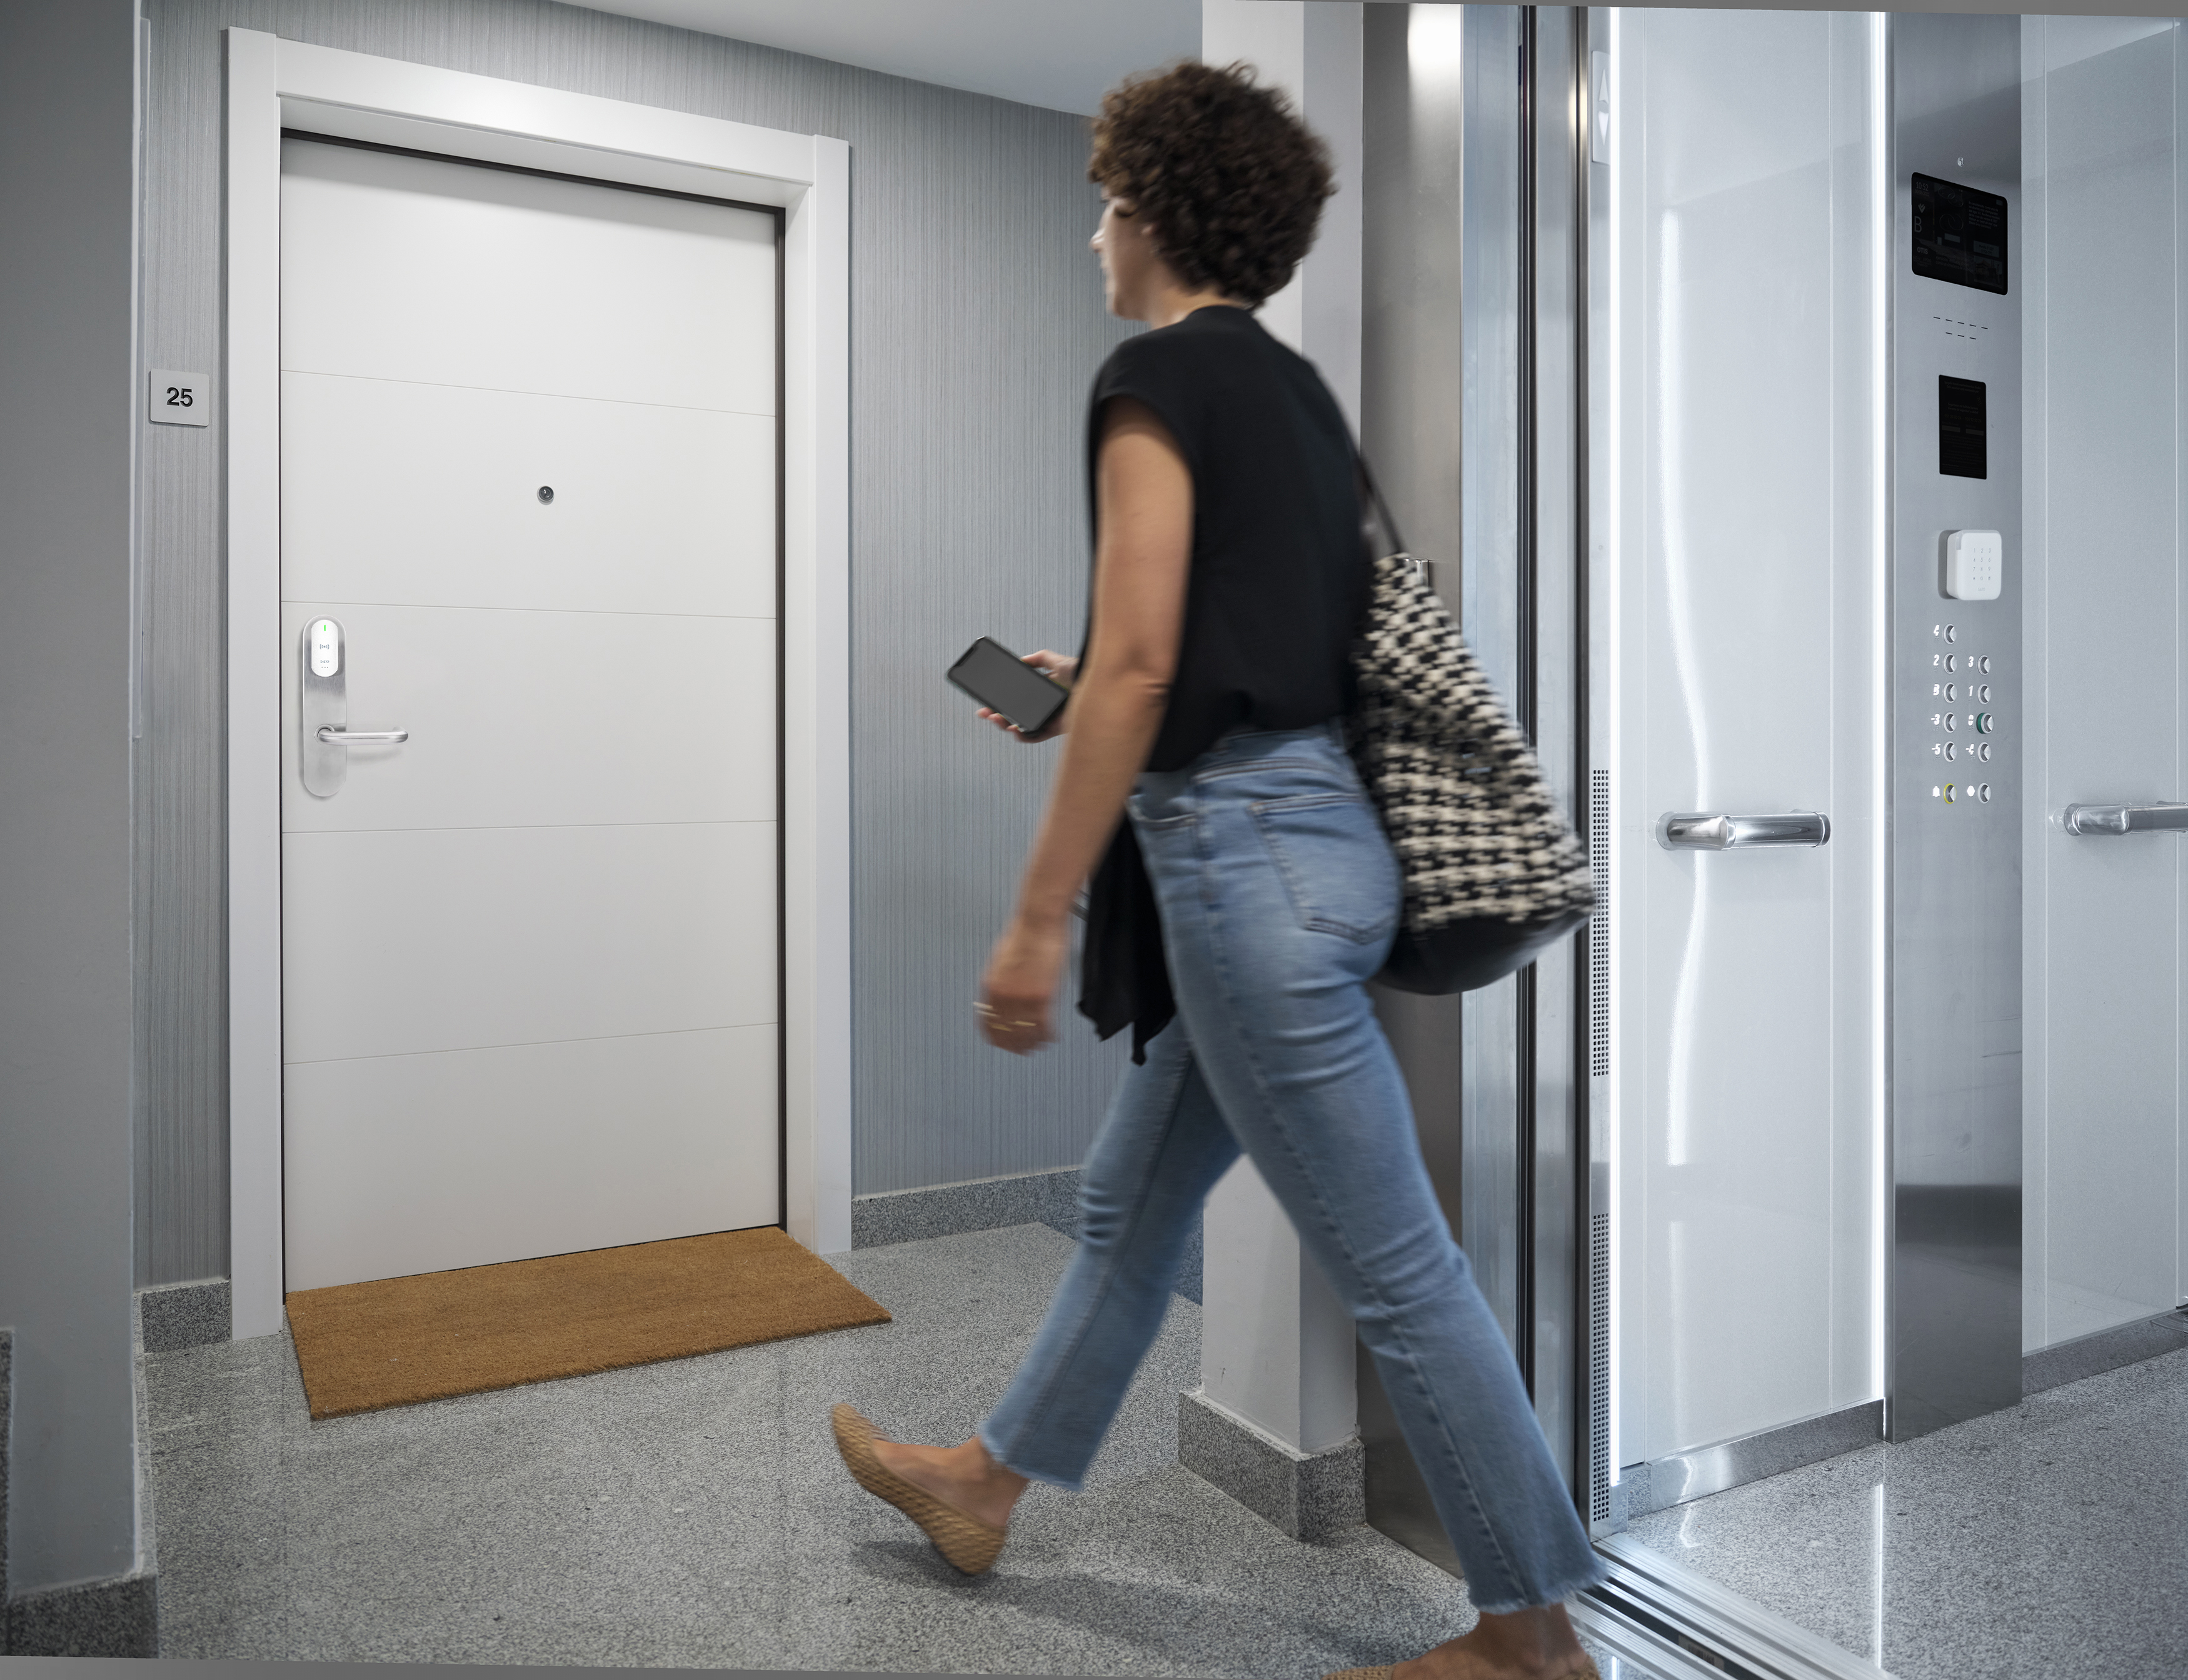 A woman uses her iPhone to access the elevator and her apartment door.